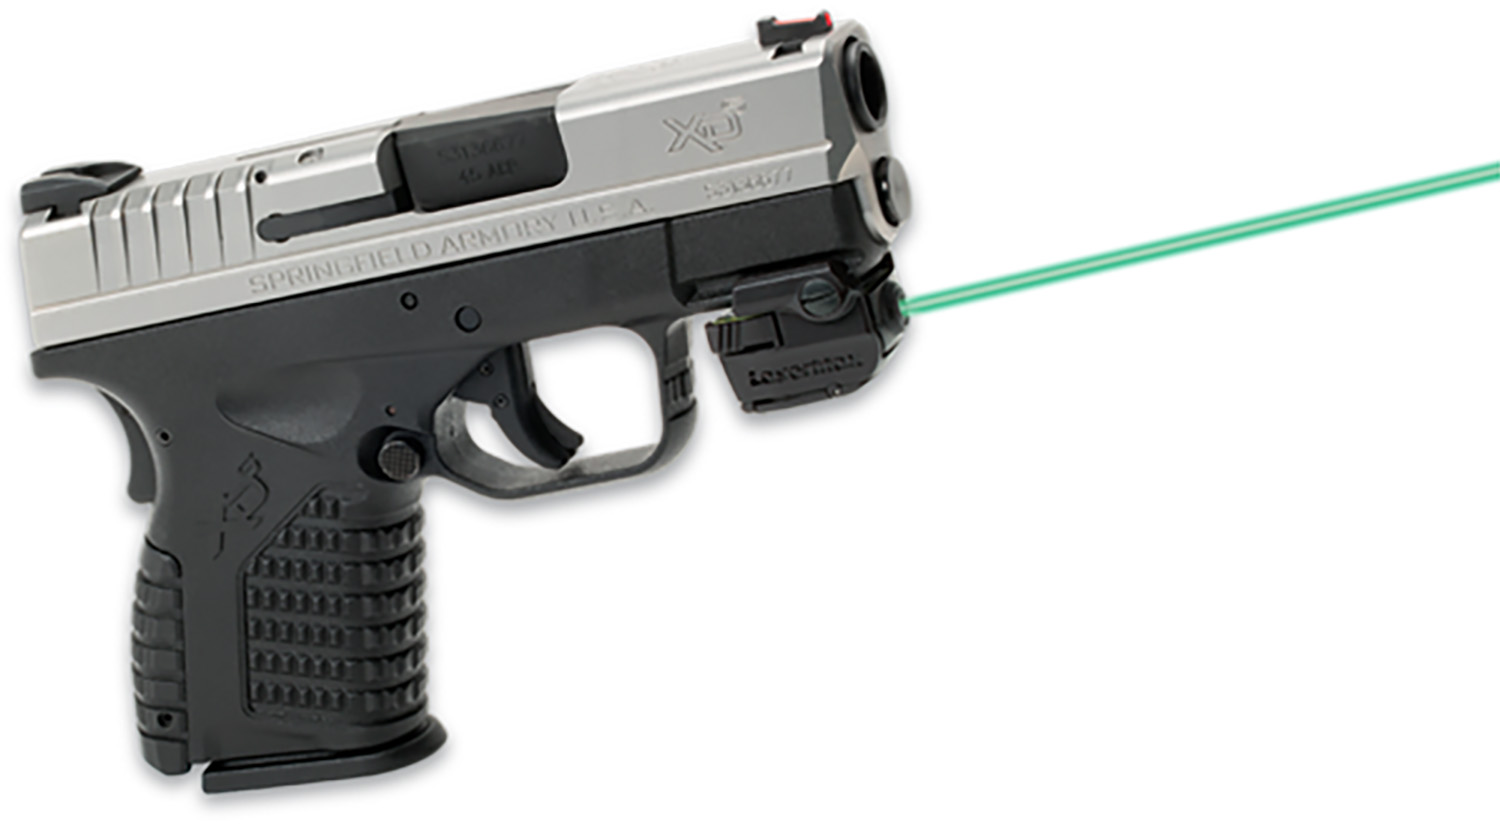 LaserMax LMSMICRO2G Micro ll Laser 5mW Green Laser with 532nM Wavelength & Black Finish for Rail-Equipped Compact & Subcompact Pistols